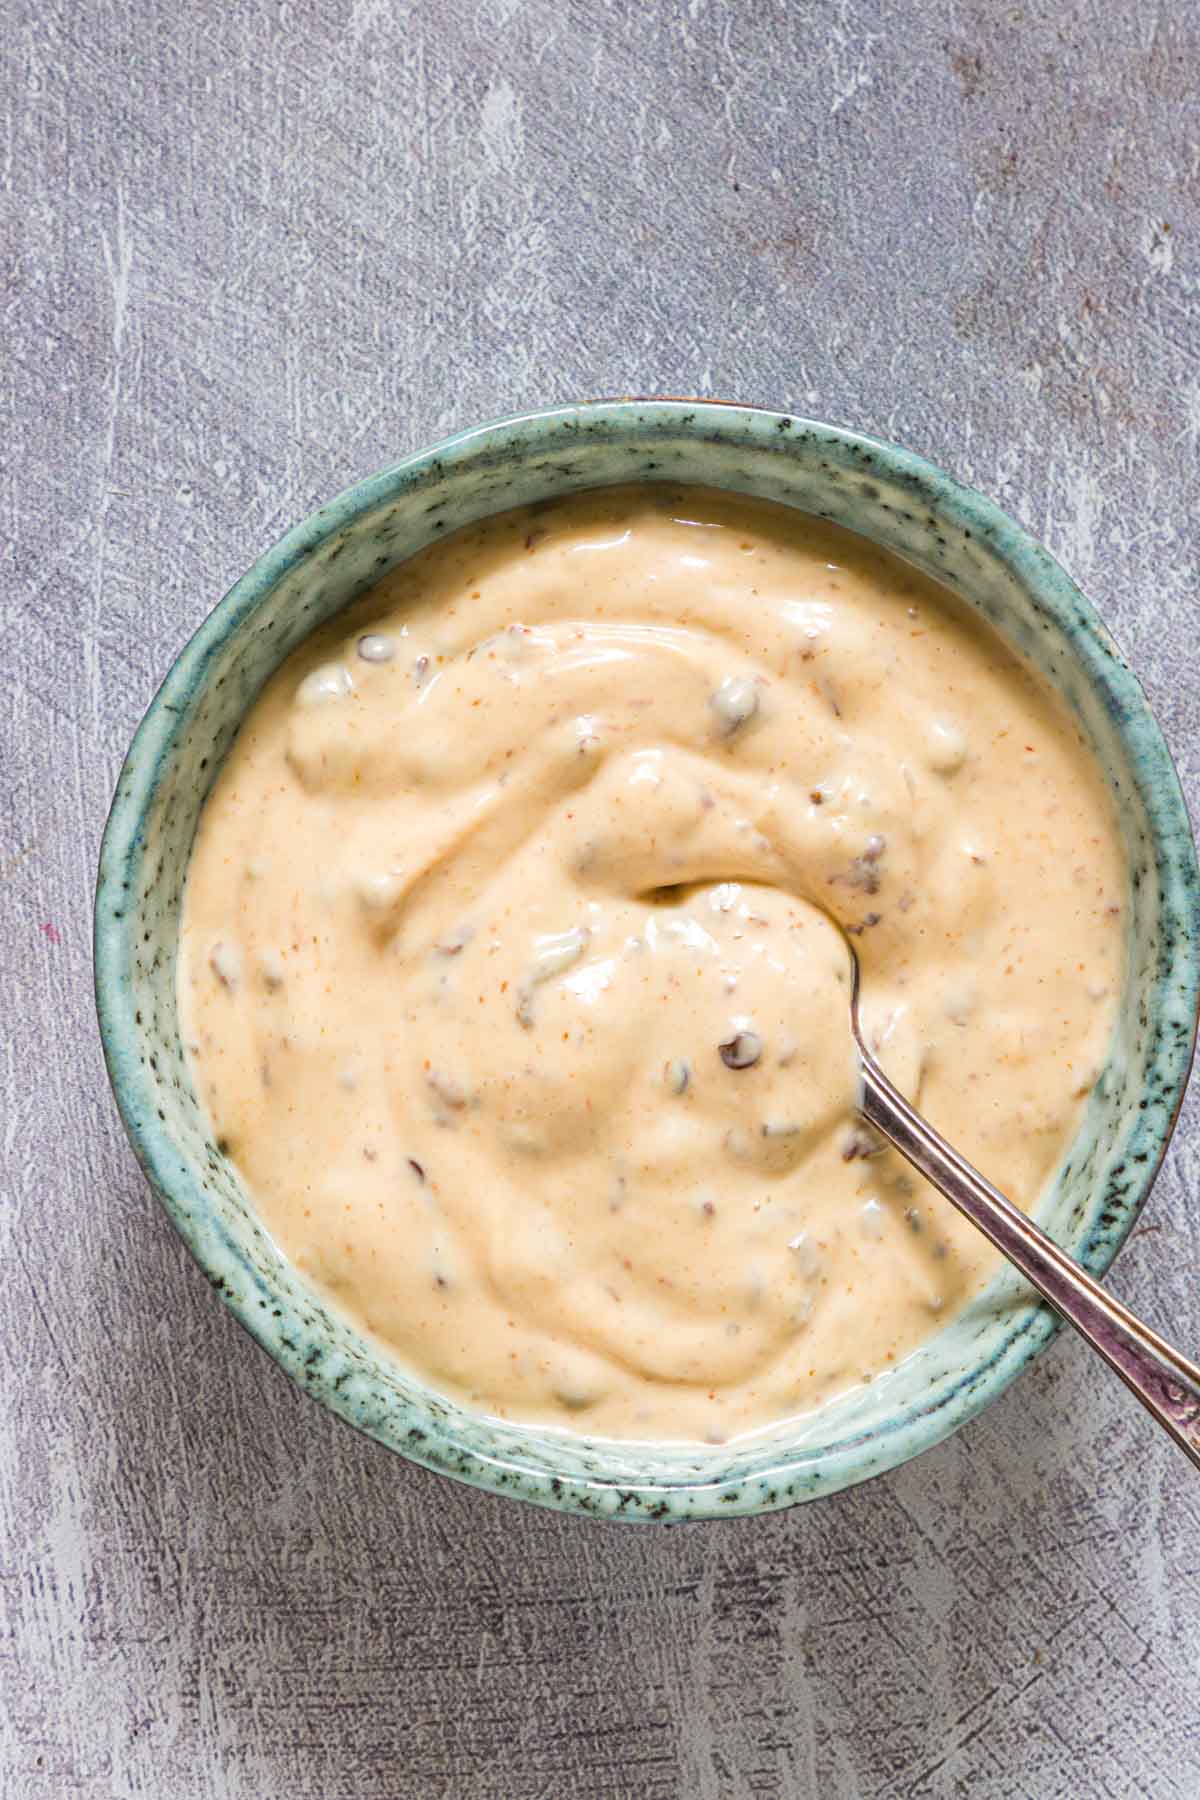 top down view of a bowl filled with the completed chipotle aioli recipe